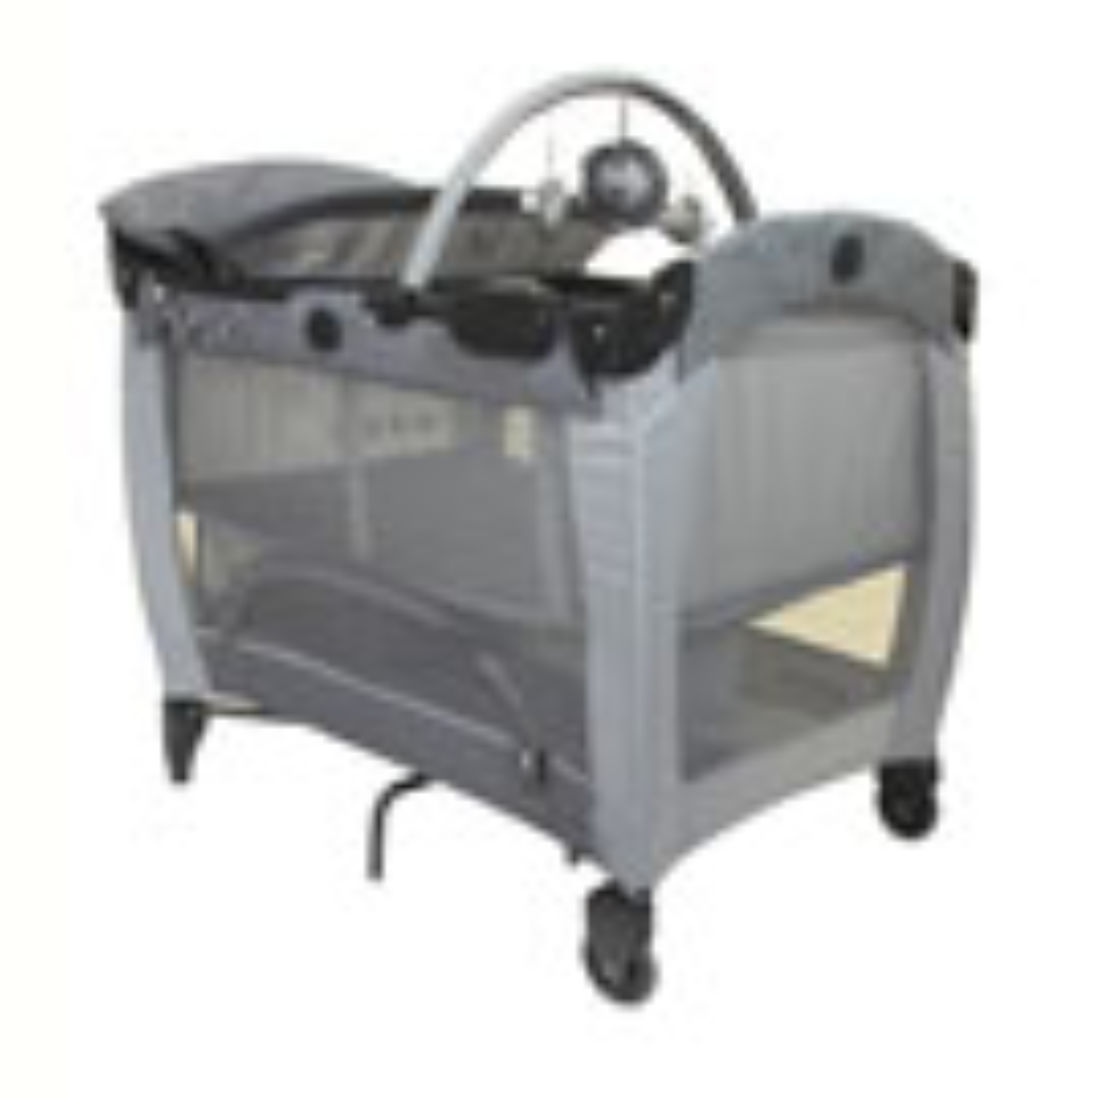 graco travel cot size